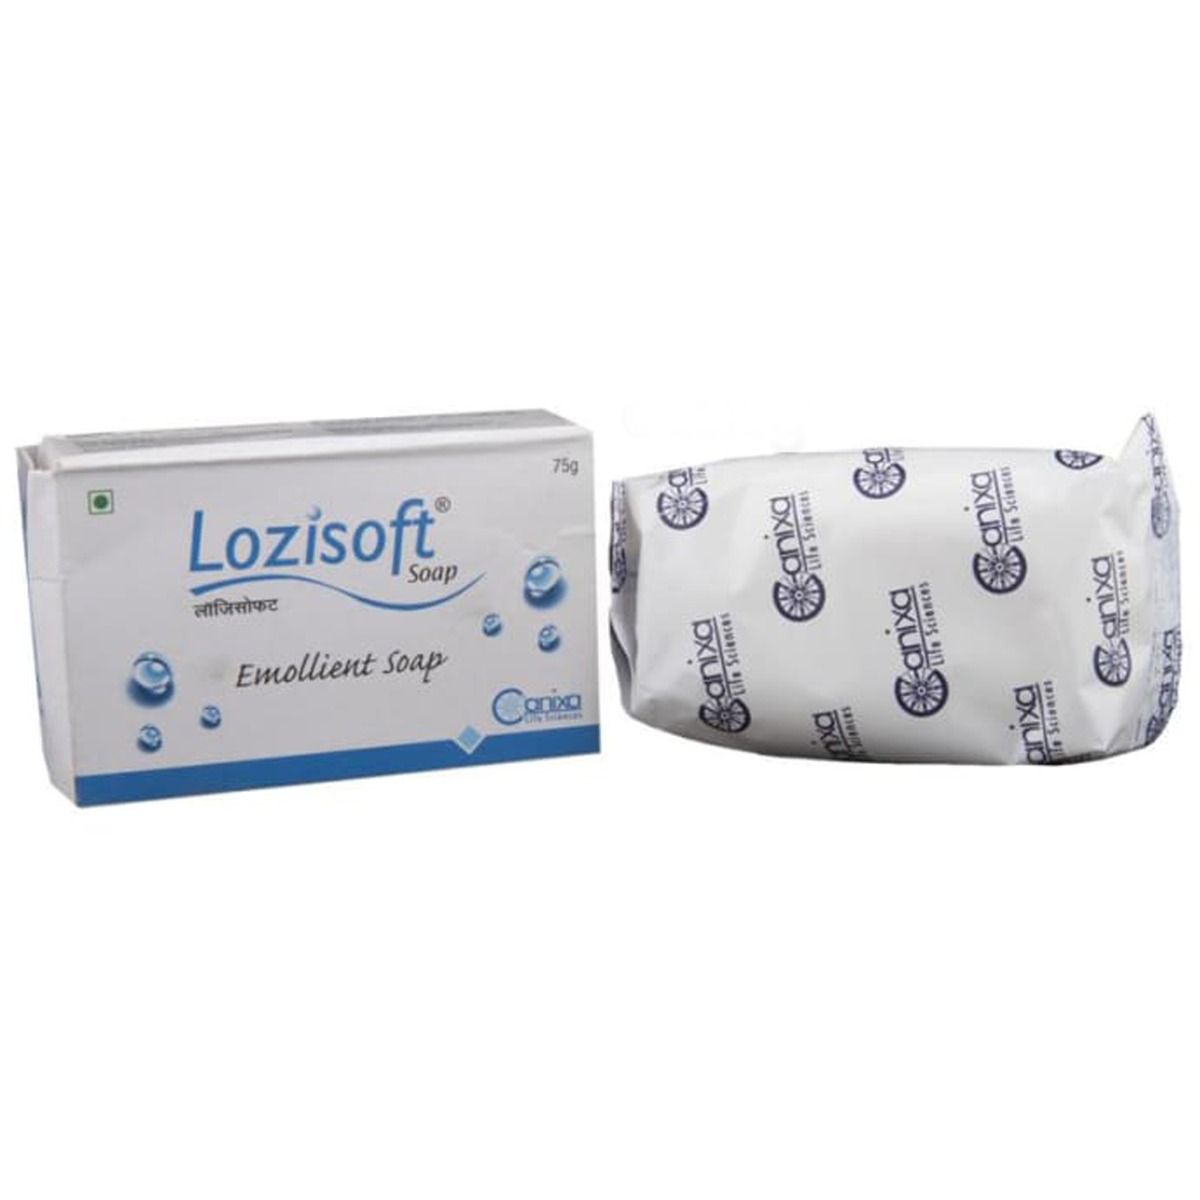 Lozisoft Soap,75 gm, Pack of 1 